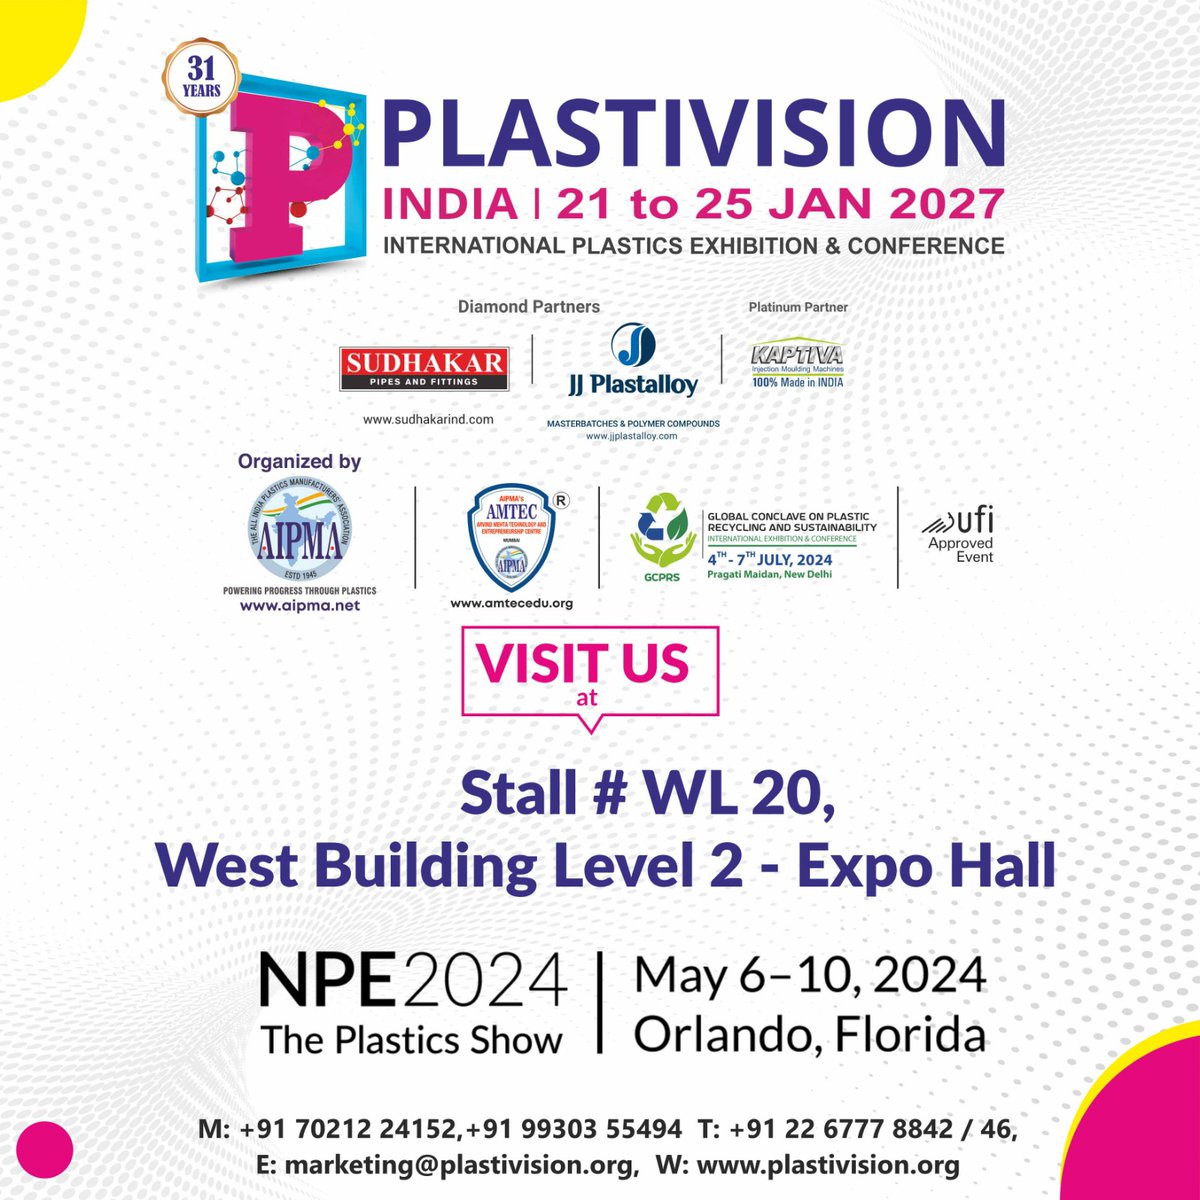 Plastivision India: Meet us at Stall # WL 20, West Building Level 2 - Expo Hall from May 6th to 10th. 

Showcasing India's plastic sector to a global audience.

Looking forward to seeing you there!

#PlastivisionIndia #Npe #GlobalConnections